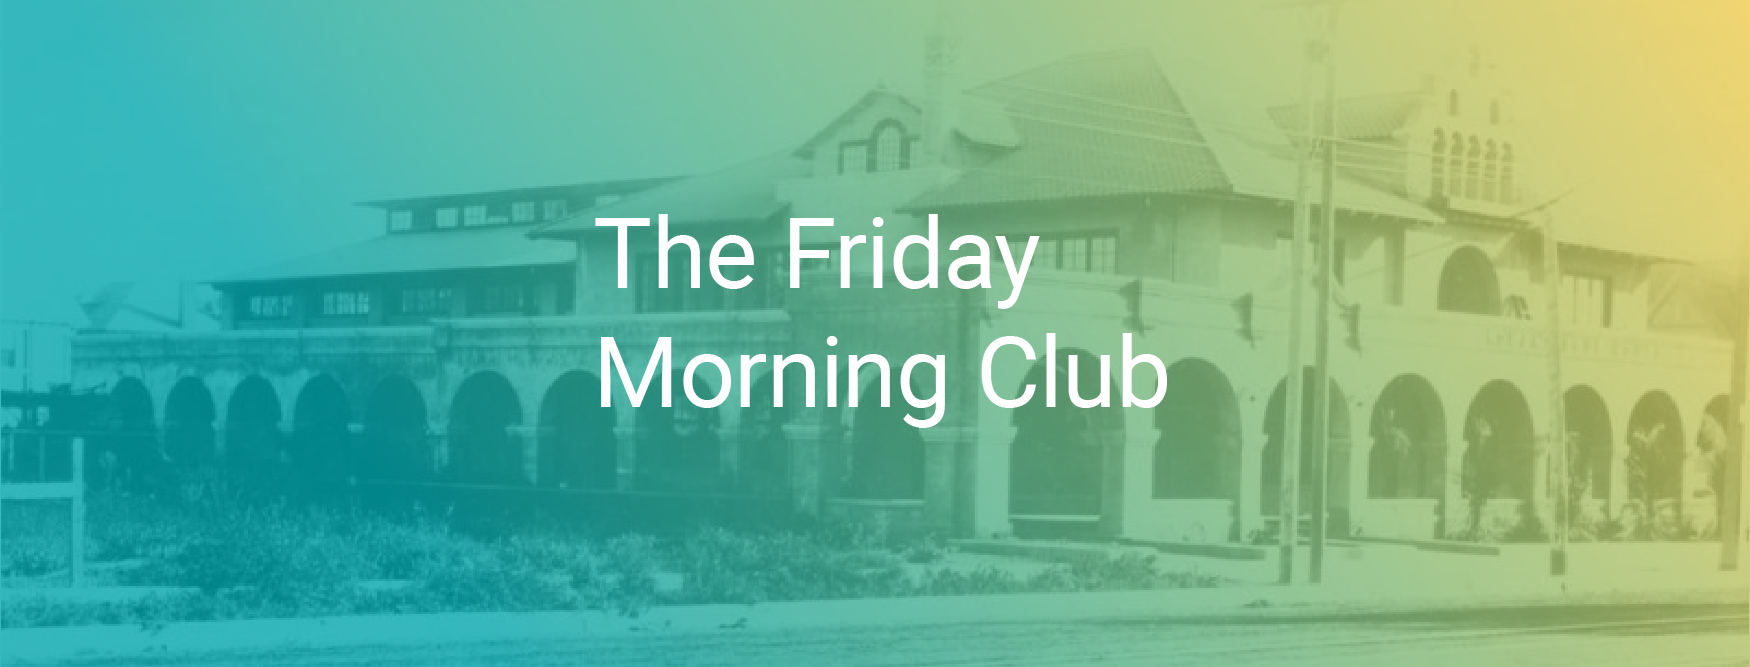 The Friday Morning Club